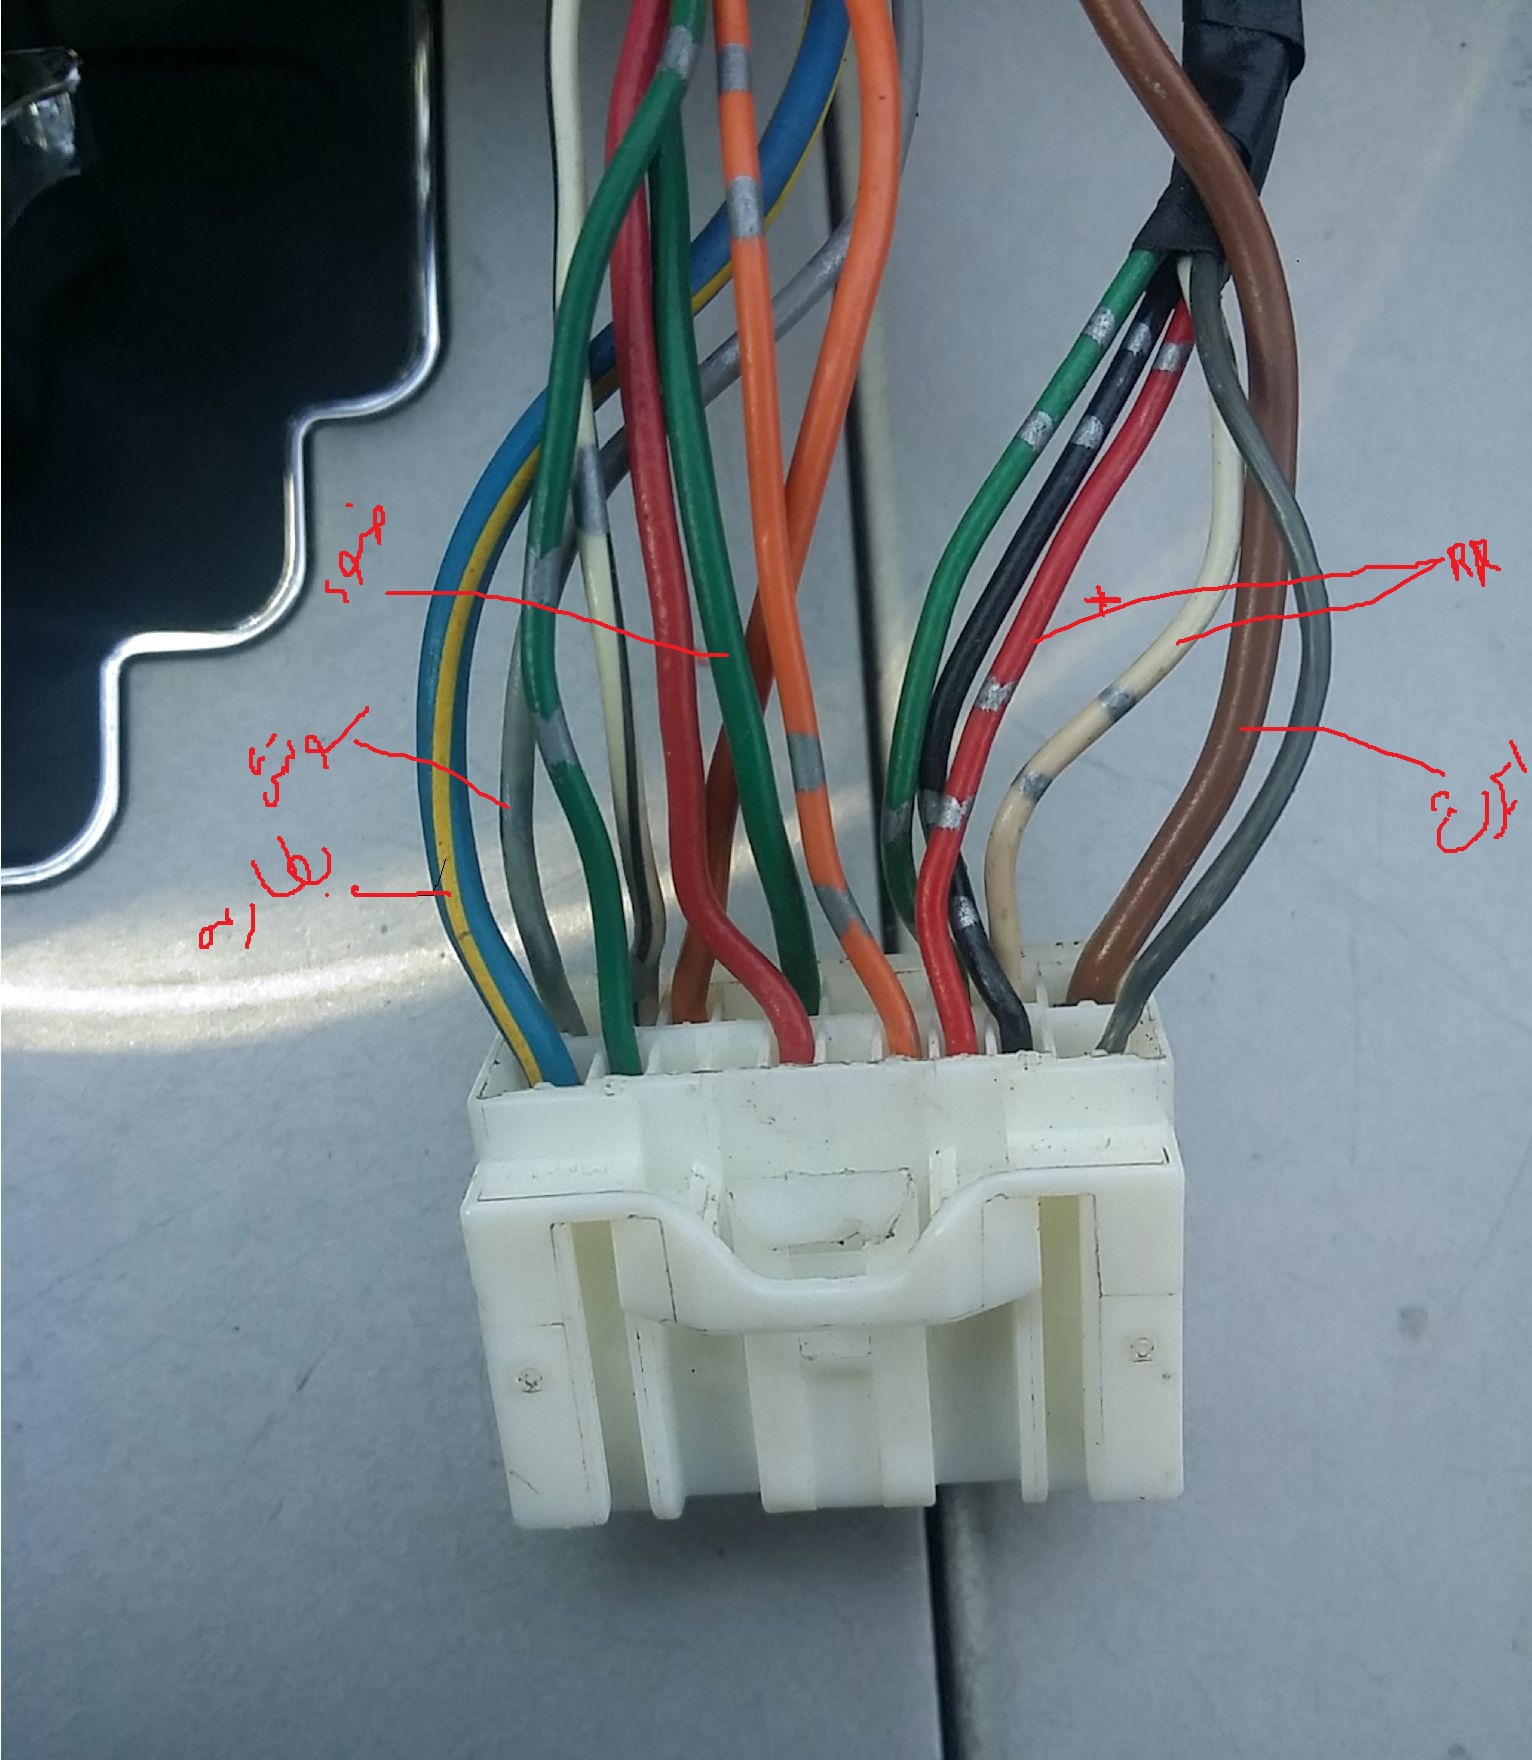 Default Toyota Camry 2007 radio wire - YotaTech Forums